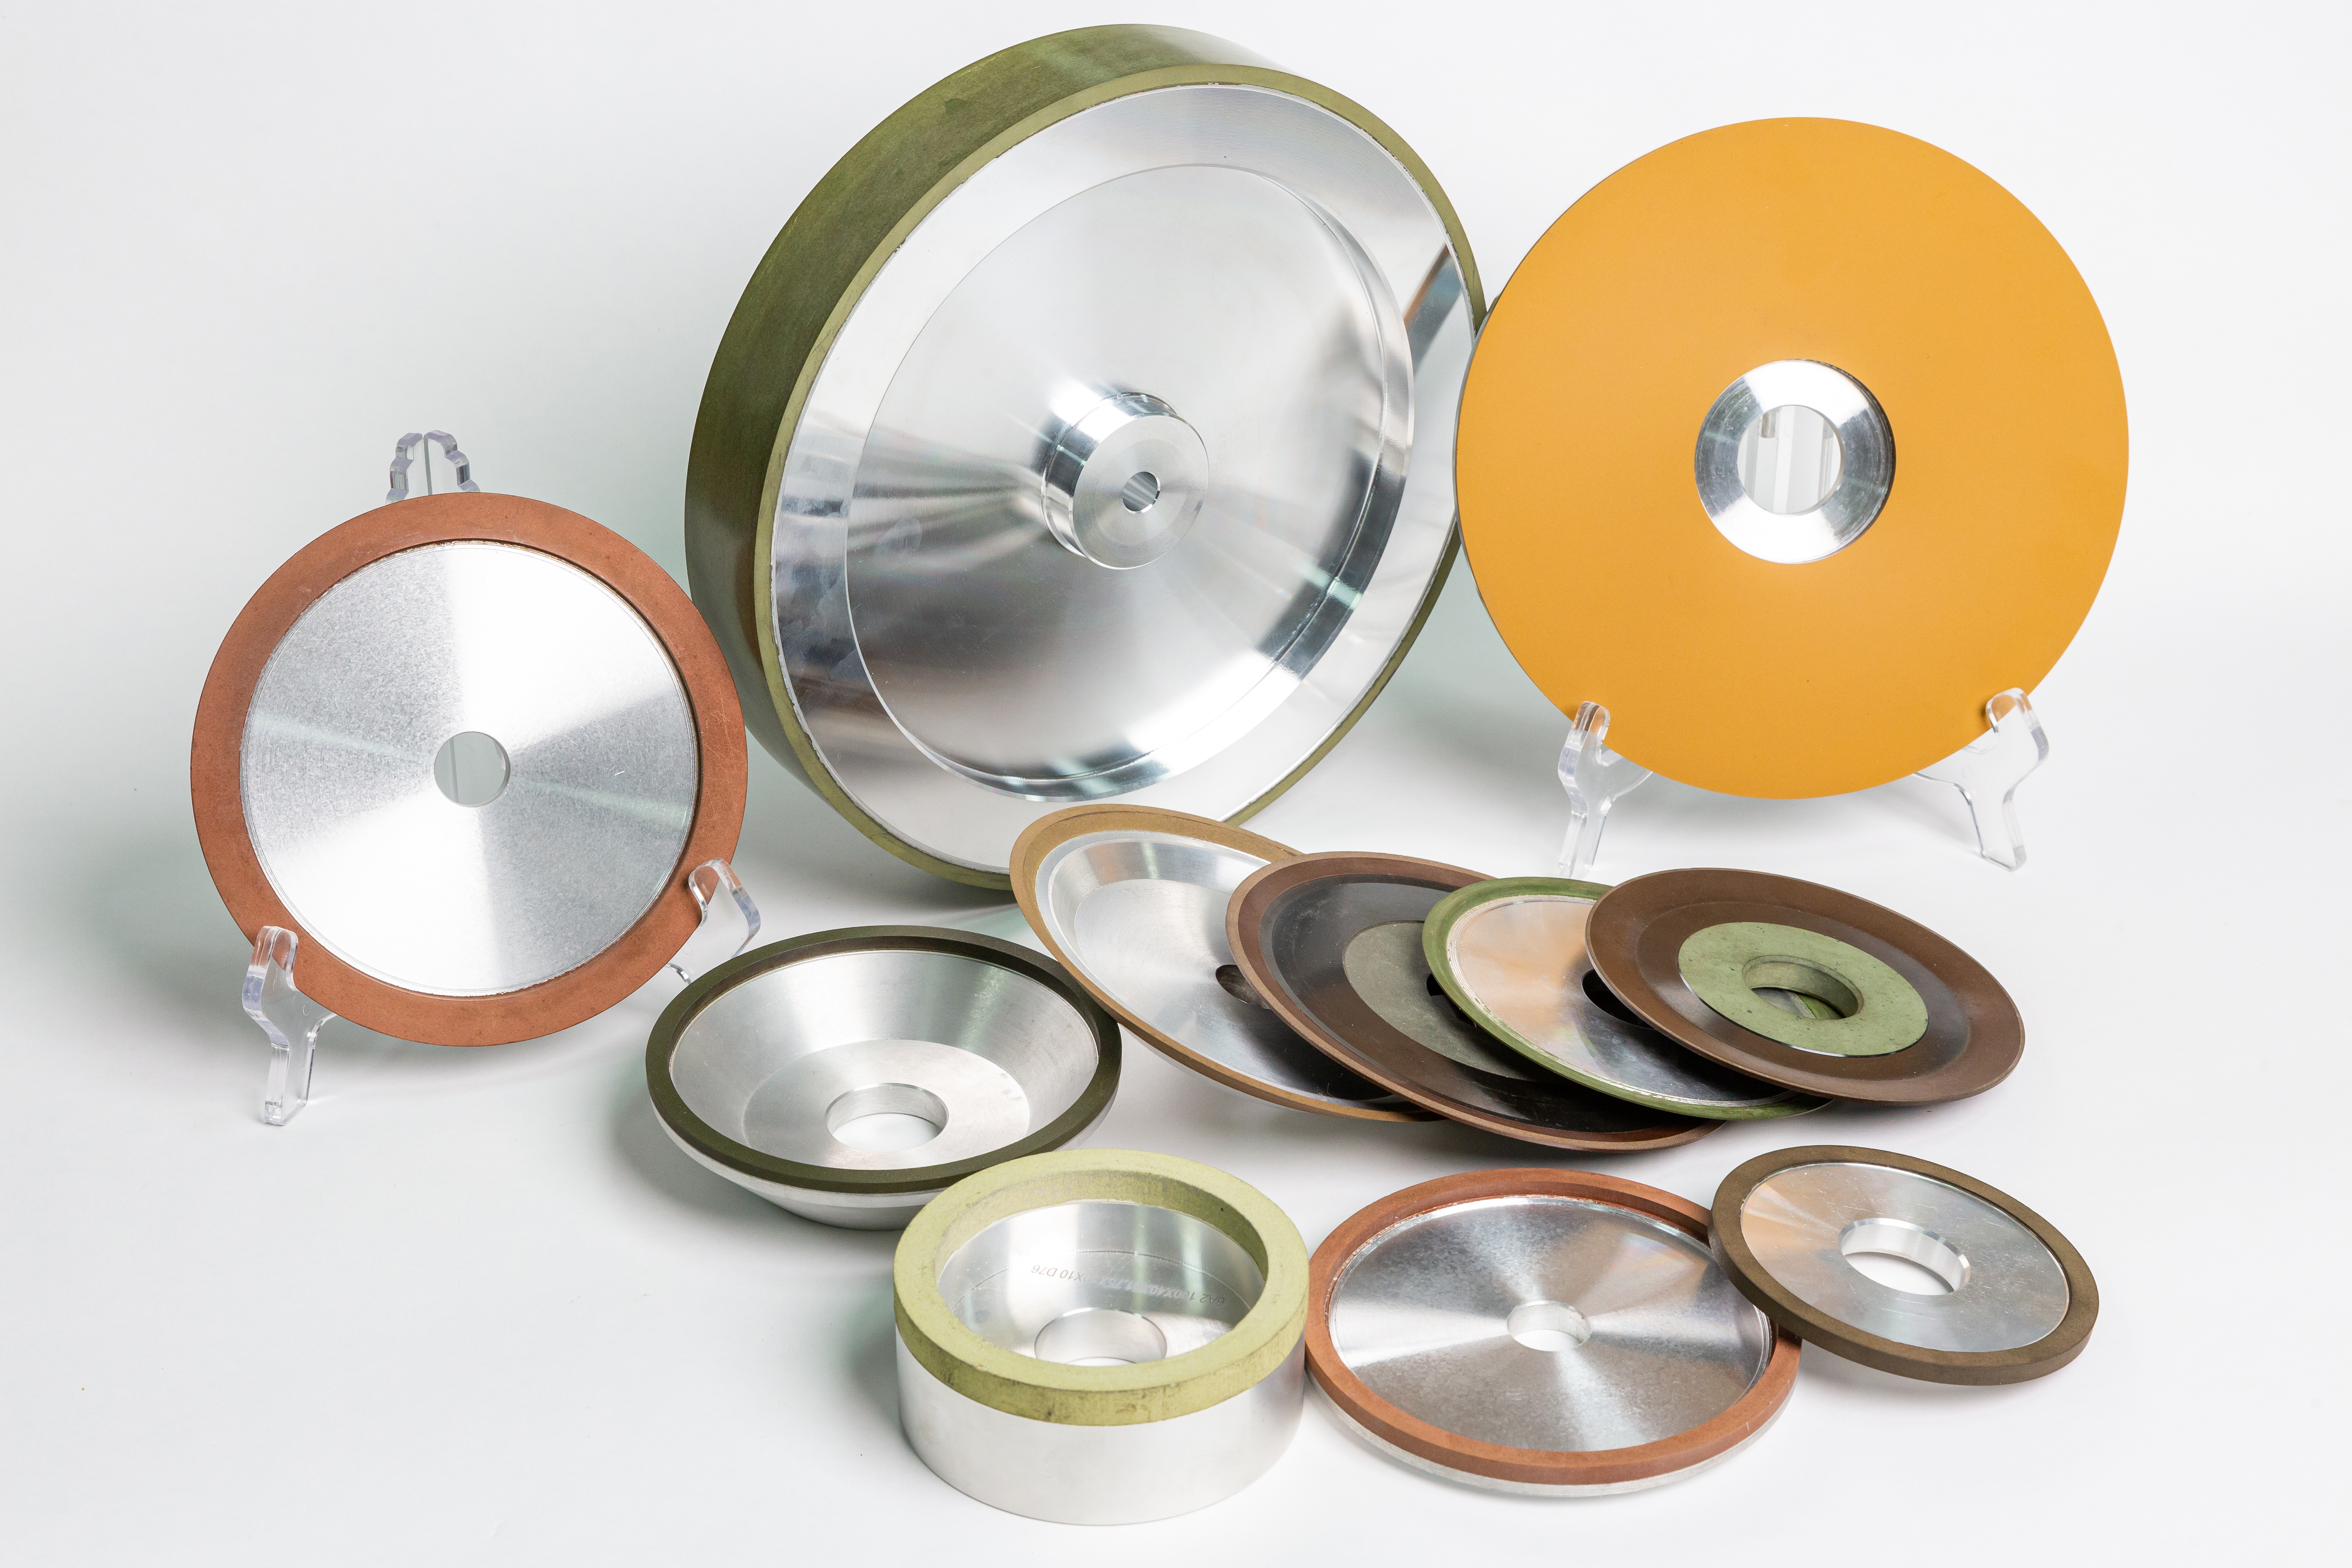 The Difference Between CBN Grinding Wheel and Diamond Grinding Wheel